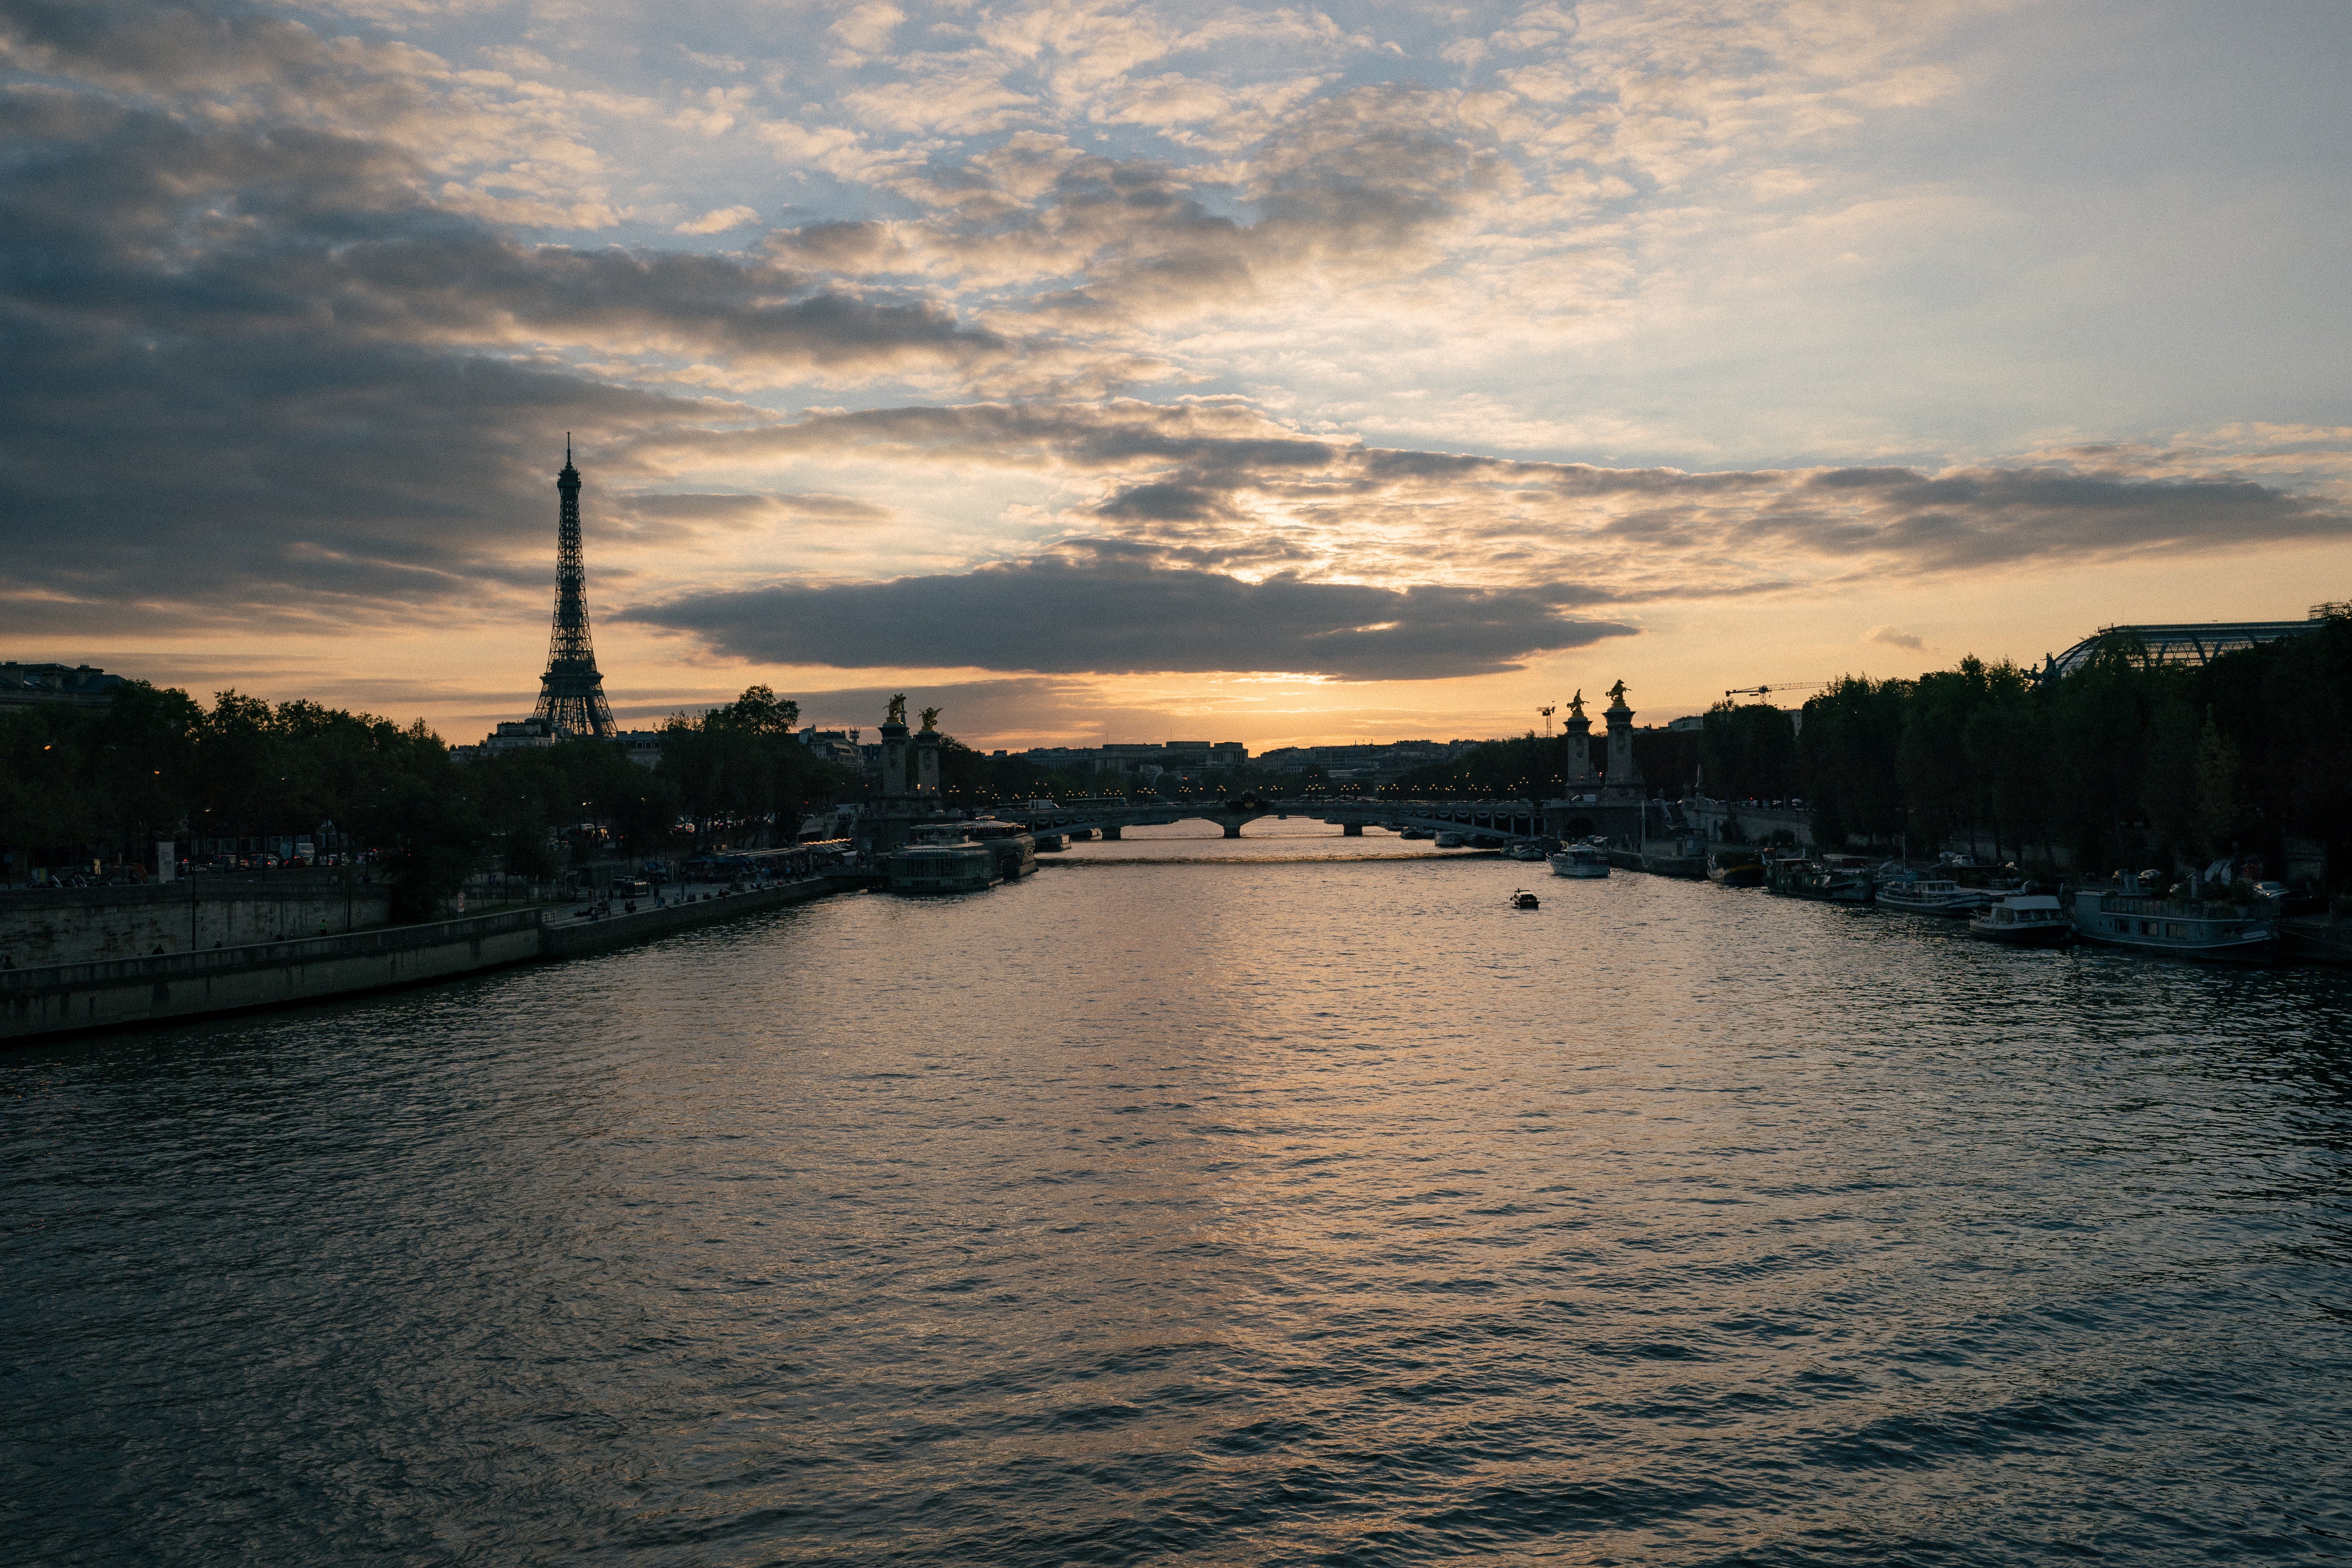 When Paris hosted its first Olympic Games in 1900, the swimming competitions took place in the Seine